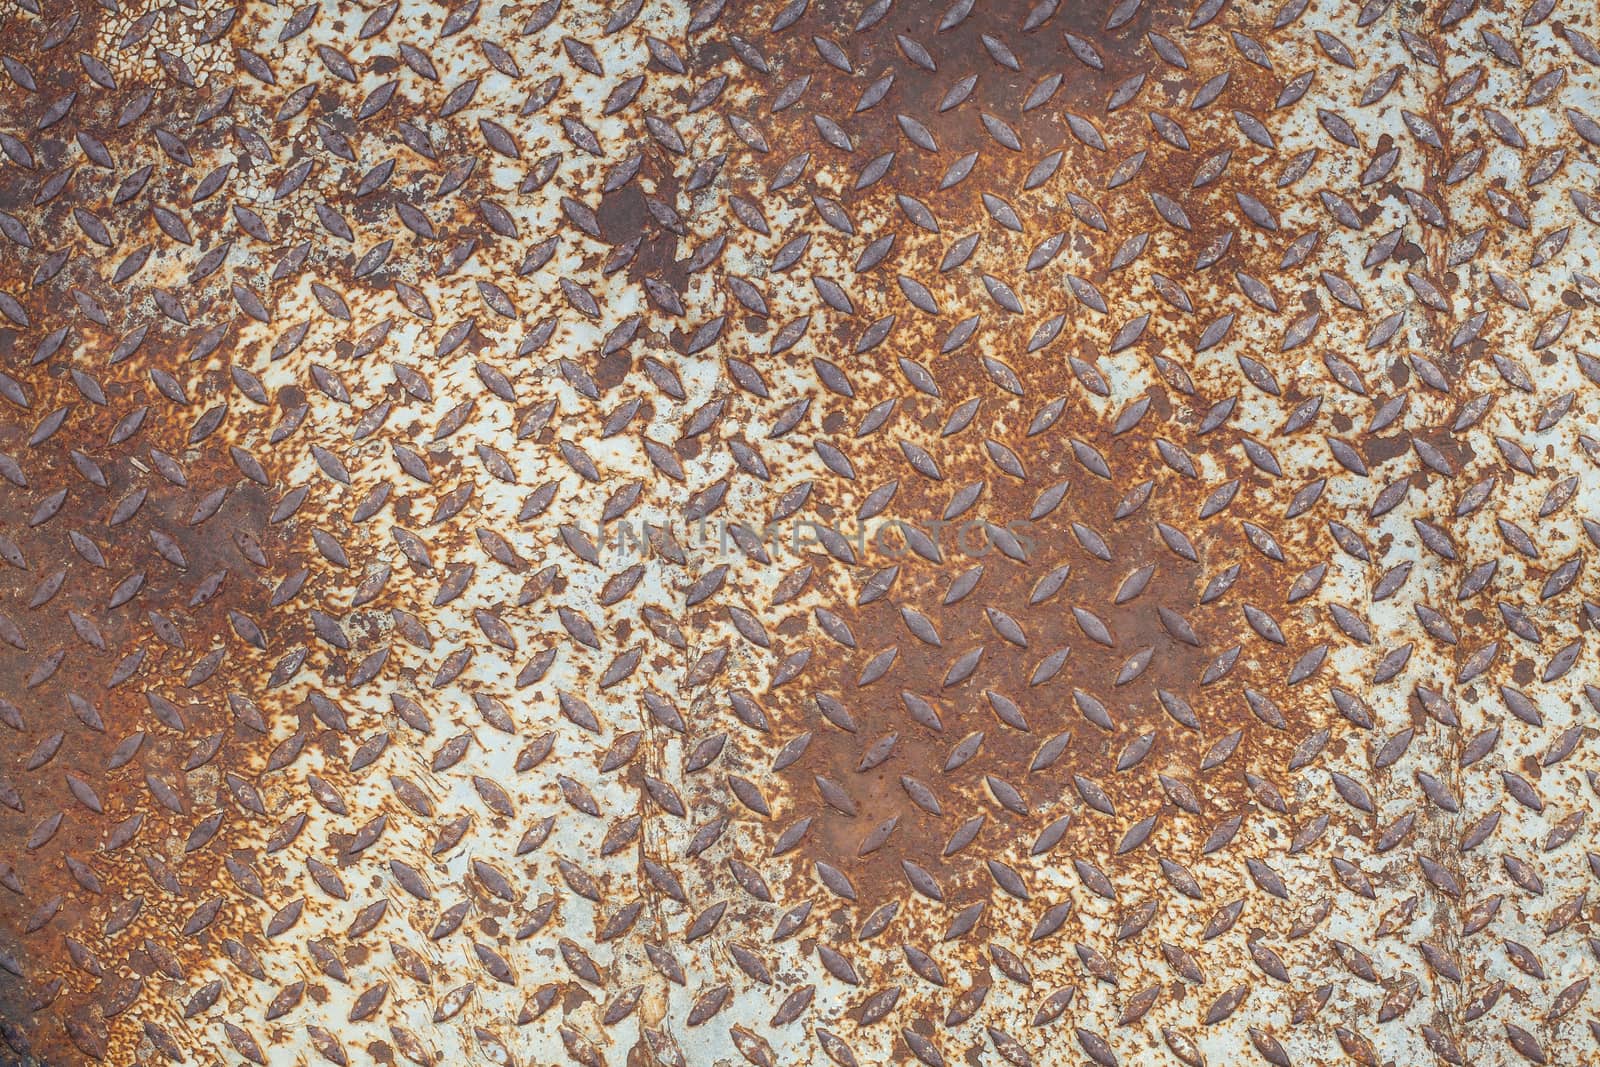 Steel plate slip old metal floor sheet, rusty steel plate texture, metallic texture, steel industry background, aluminum surfaces background, industrial shiny metal silver with rhombus shapes.